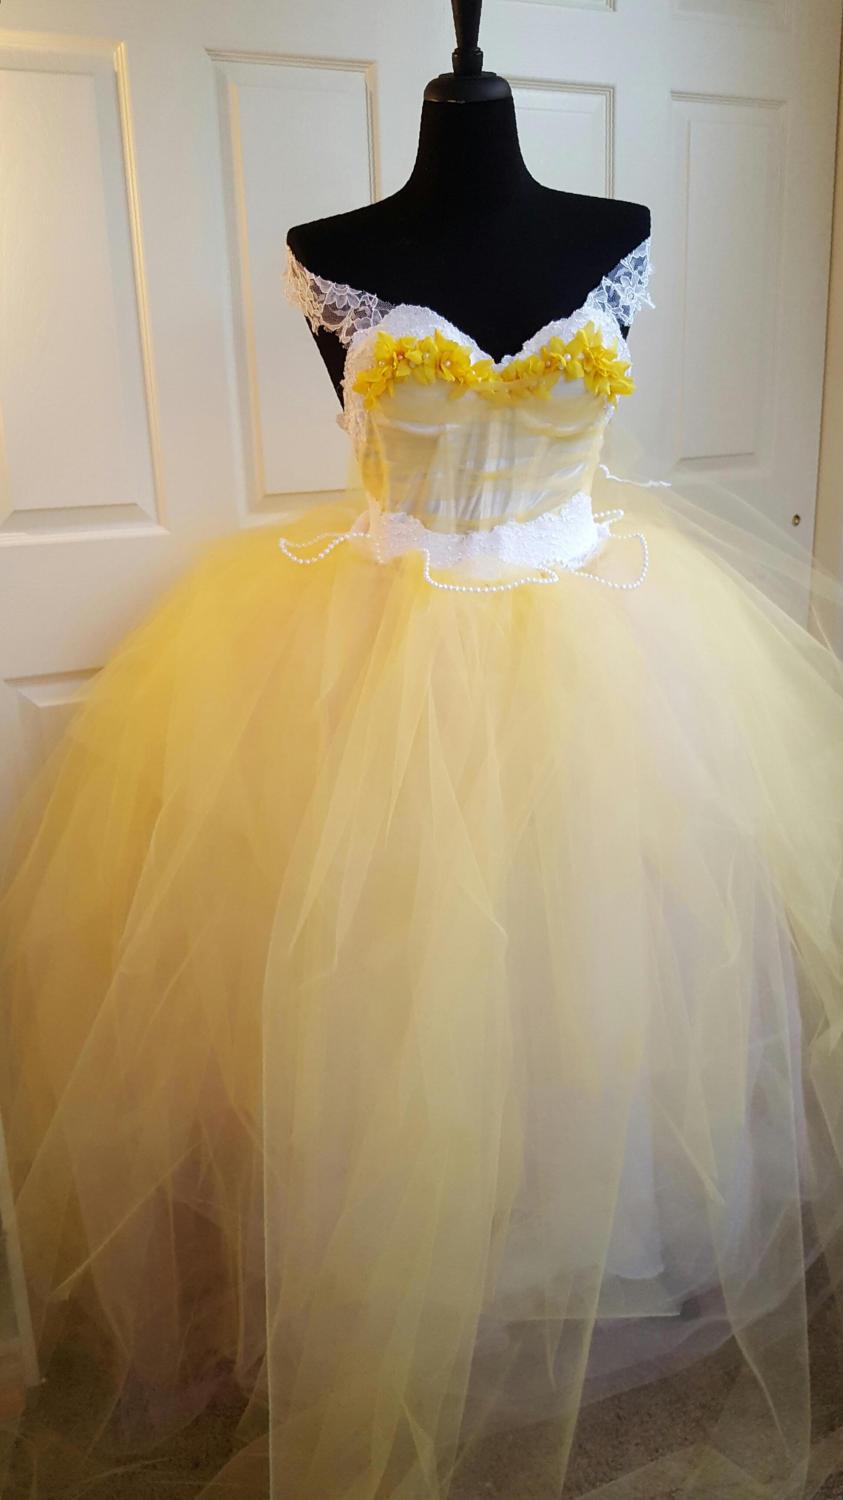 Mariage - Belle Beauty and the Beast Style Yellow White Fairytale Princess Corset w/Straps Lace Tulle Wedding Bridal Ballgown Costume Quinceanera Prom